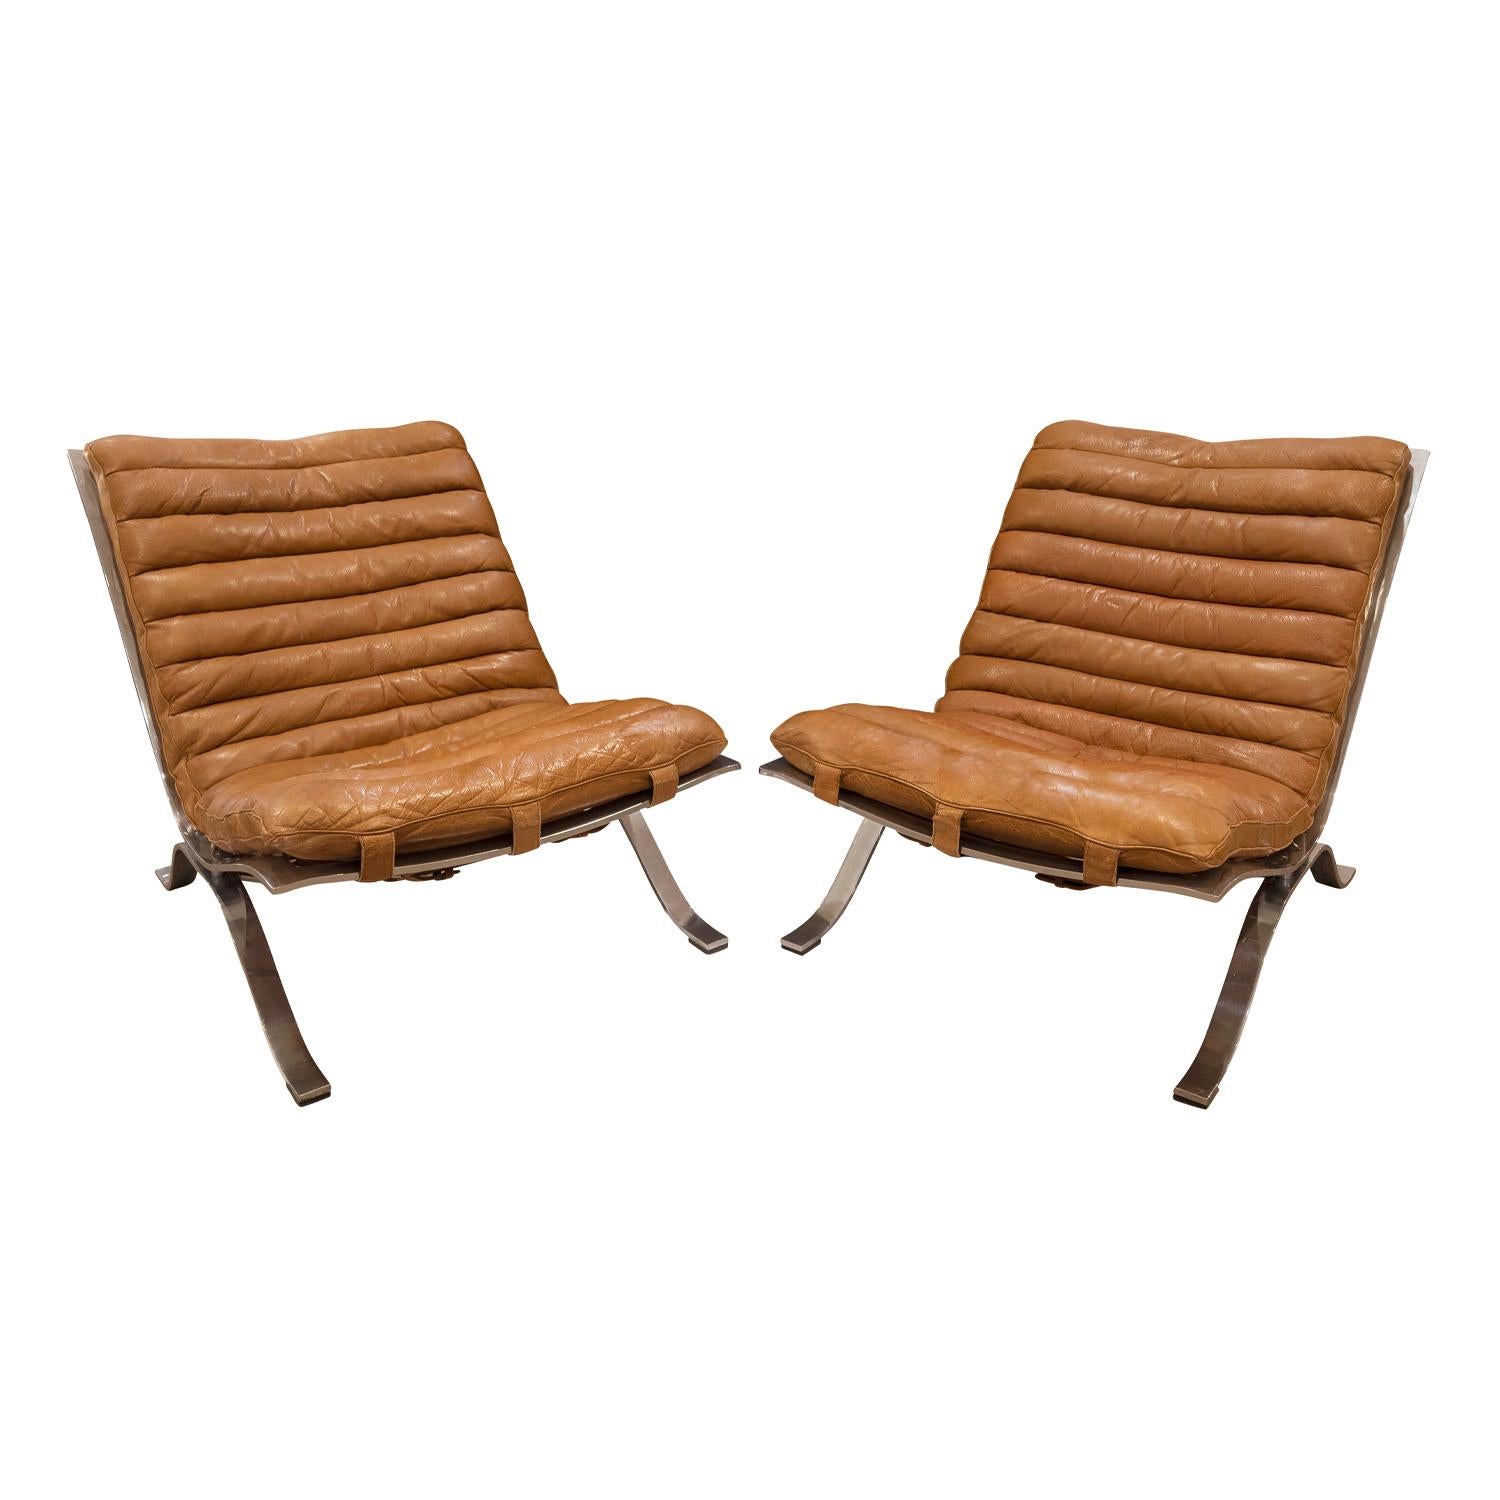 Rare pair of Ari Lounge Chairs in polished steel with original leather slings by Arne Norell for Arne Norell AB, Sweden 1960's (signed “Norell, Made in Sweden” on back metal). These chairs retain the original slings and belts on back. The color and